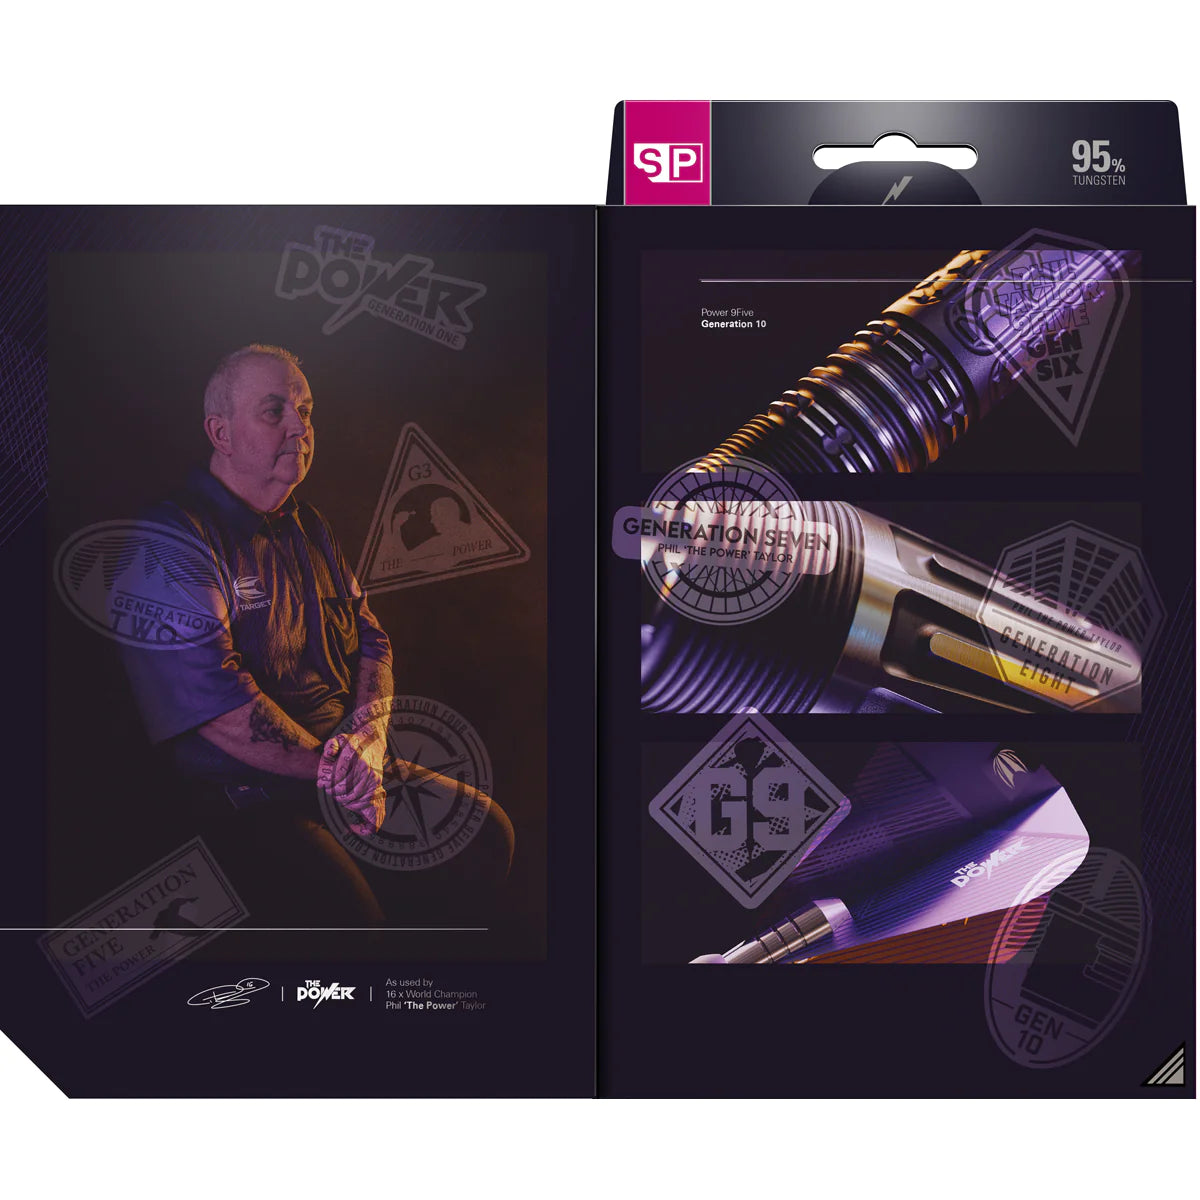 TARGET - PHIL TAYLOR POWER 9FIVE - G10 - SWISS POINT - 95% - 22g/24g/26g